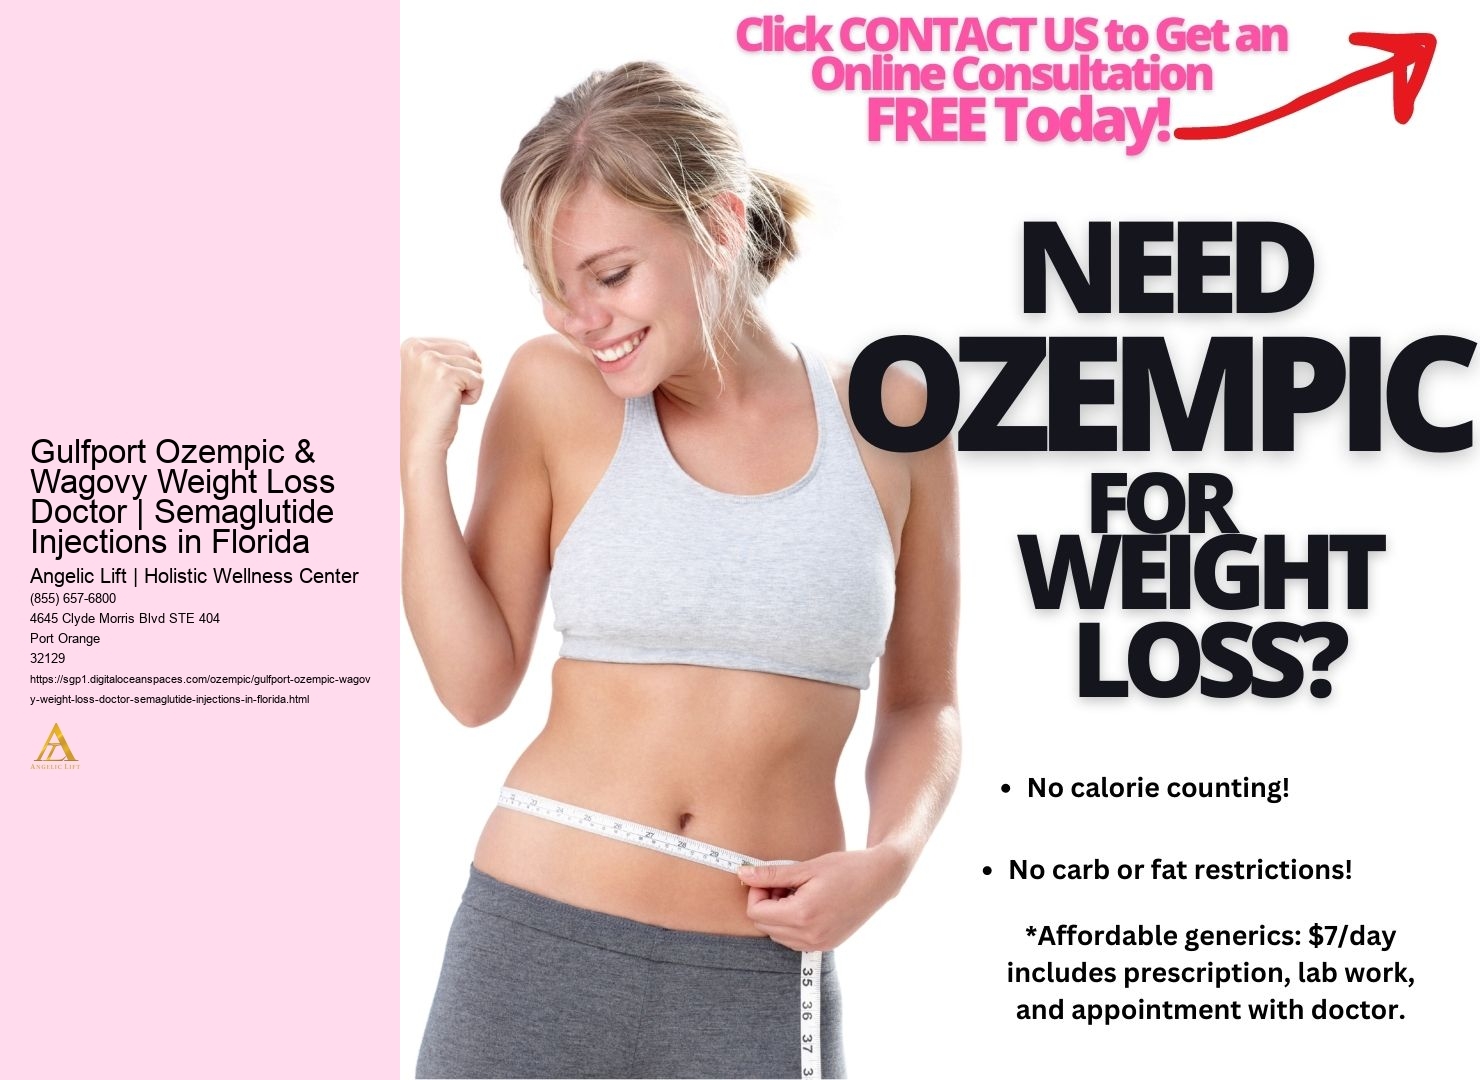 Gulfport Ozempic & Wagovy Weight Loss Doctor | Semaglutide Injections in Florida